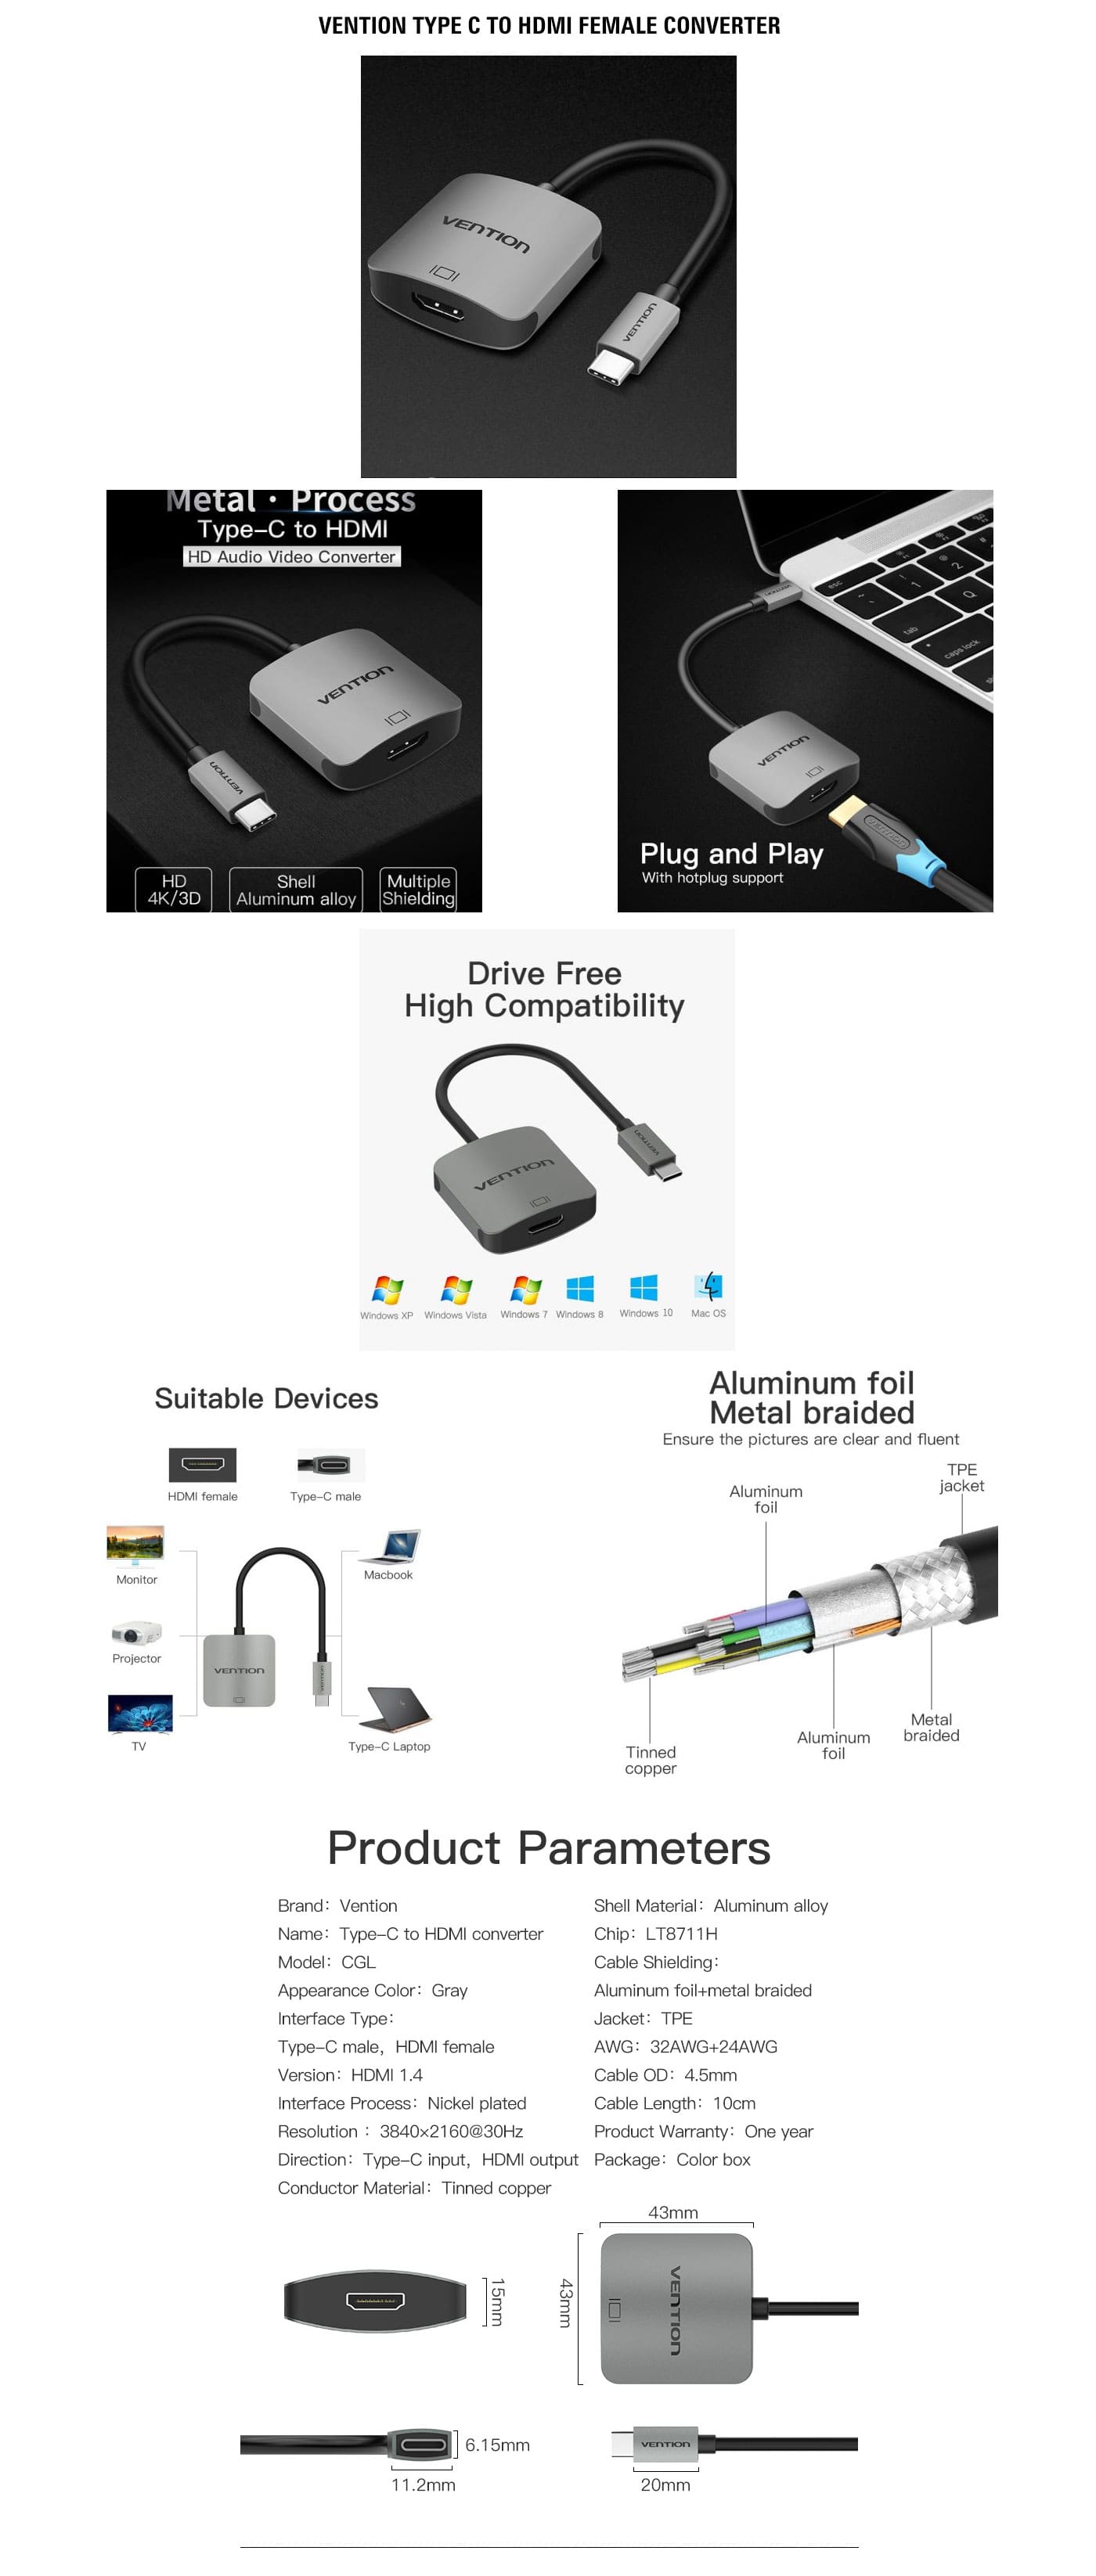 Vention Type C to HDMI Converter features